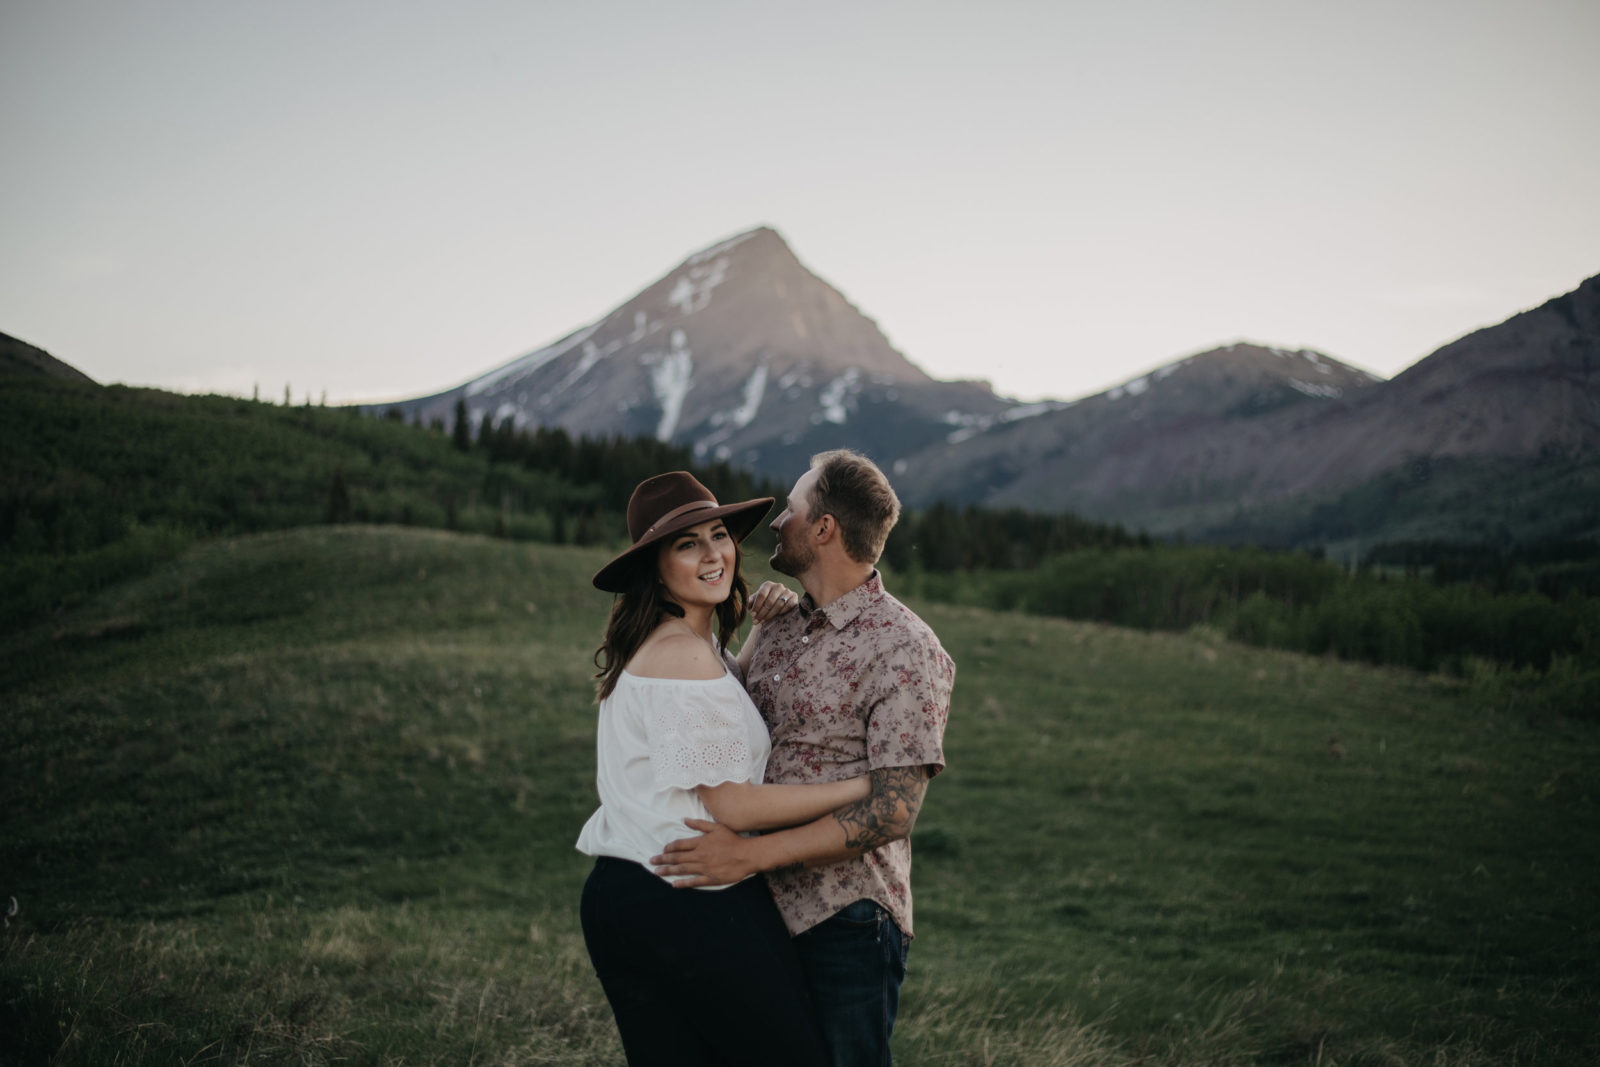 Alberta mountain engagement session captured by Malorie Reiter Photography.